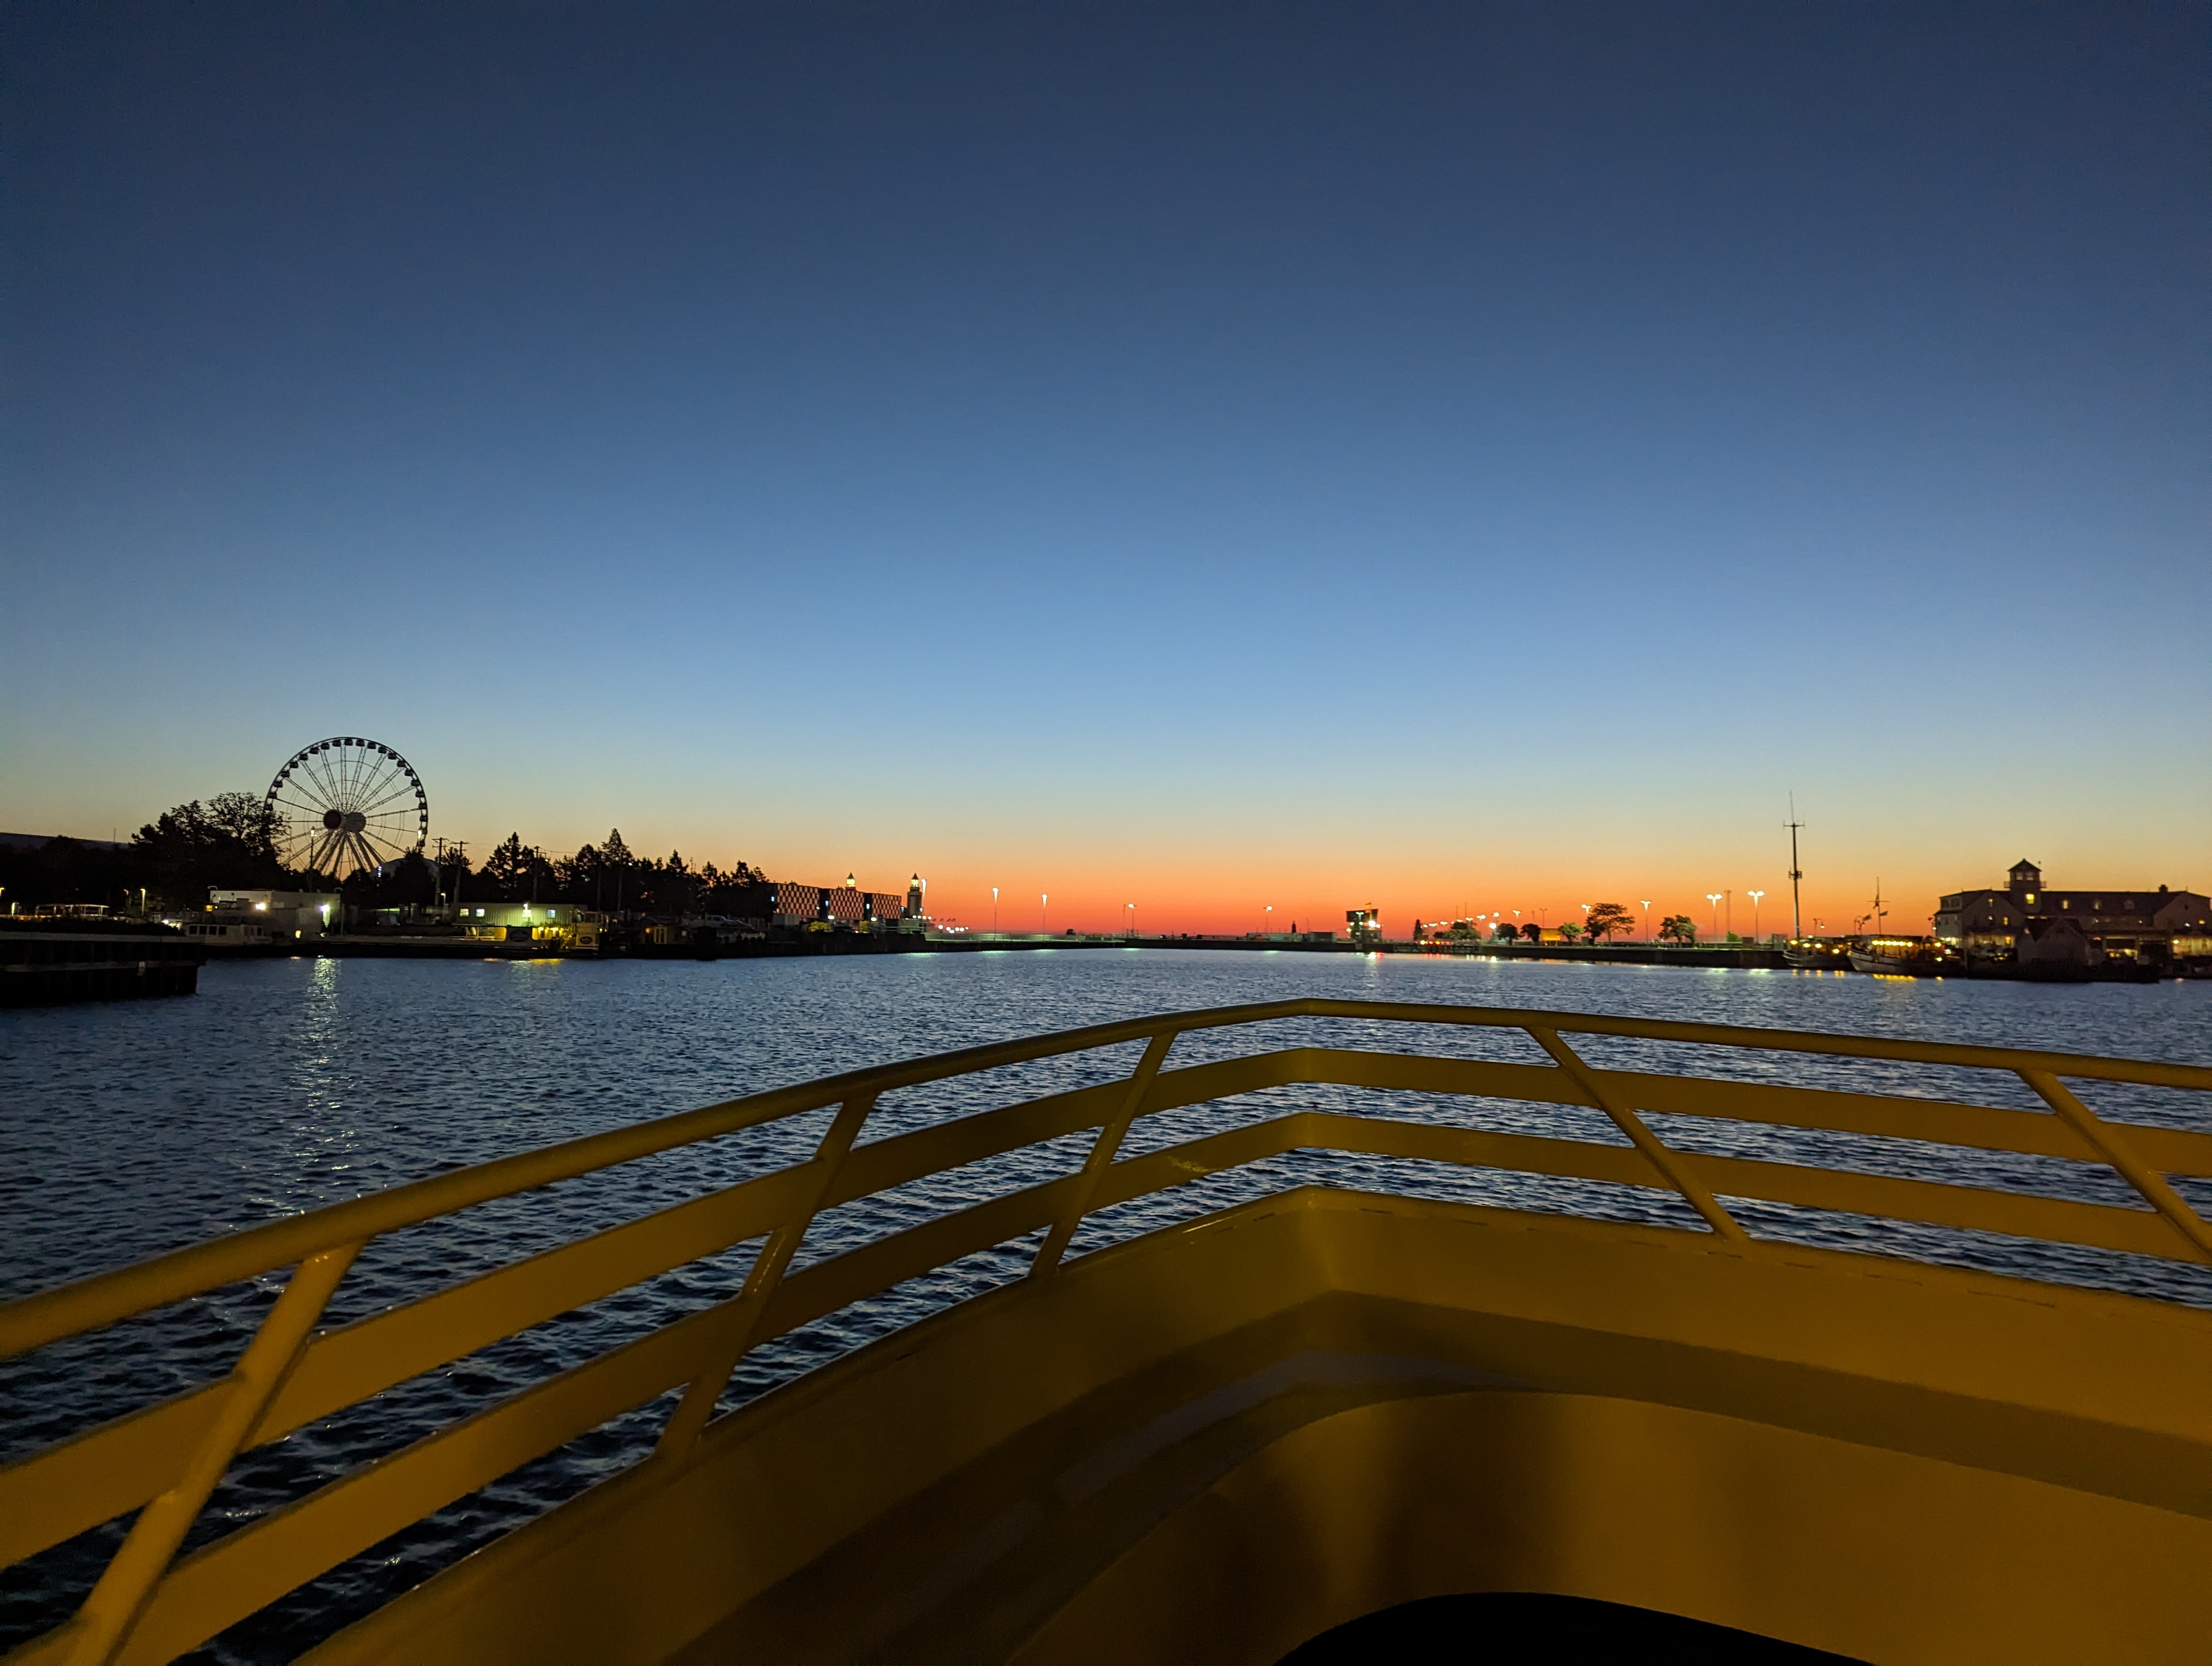 The sunrise over lake Michigan as seen from the Chicago river basin. Off to the left is Navy Pier and its ferris wheel. In the foreground can be seen the front guardrails of a yellow boat, where the shot was taken from.